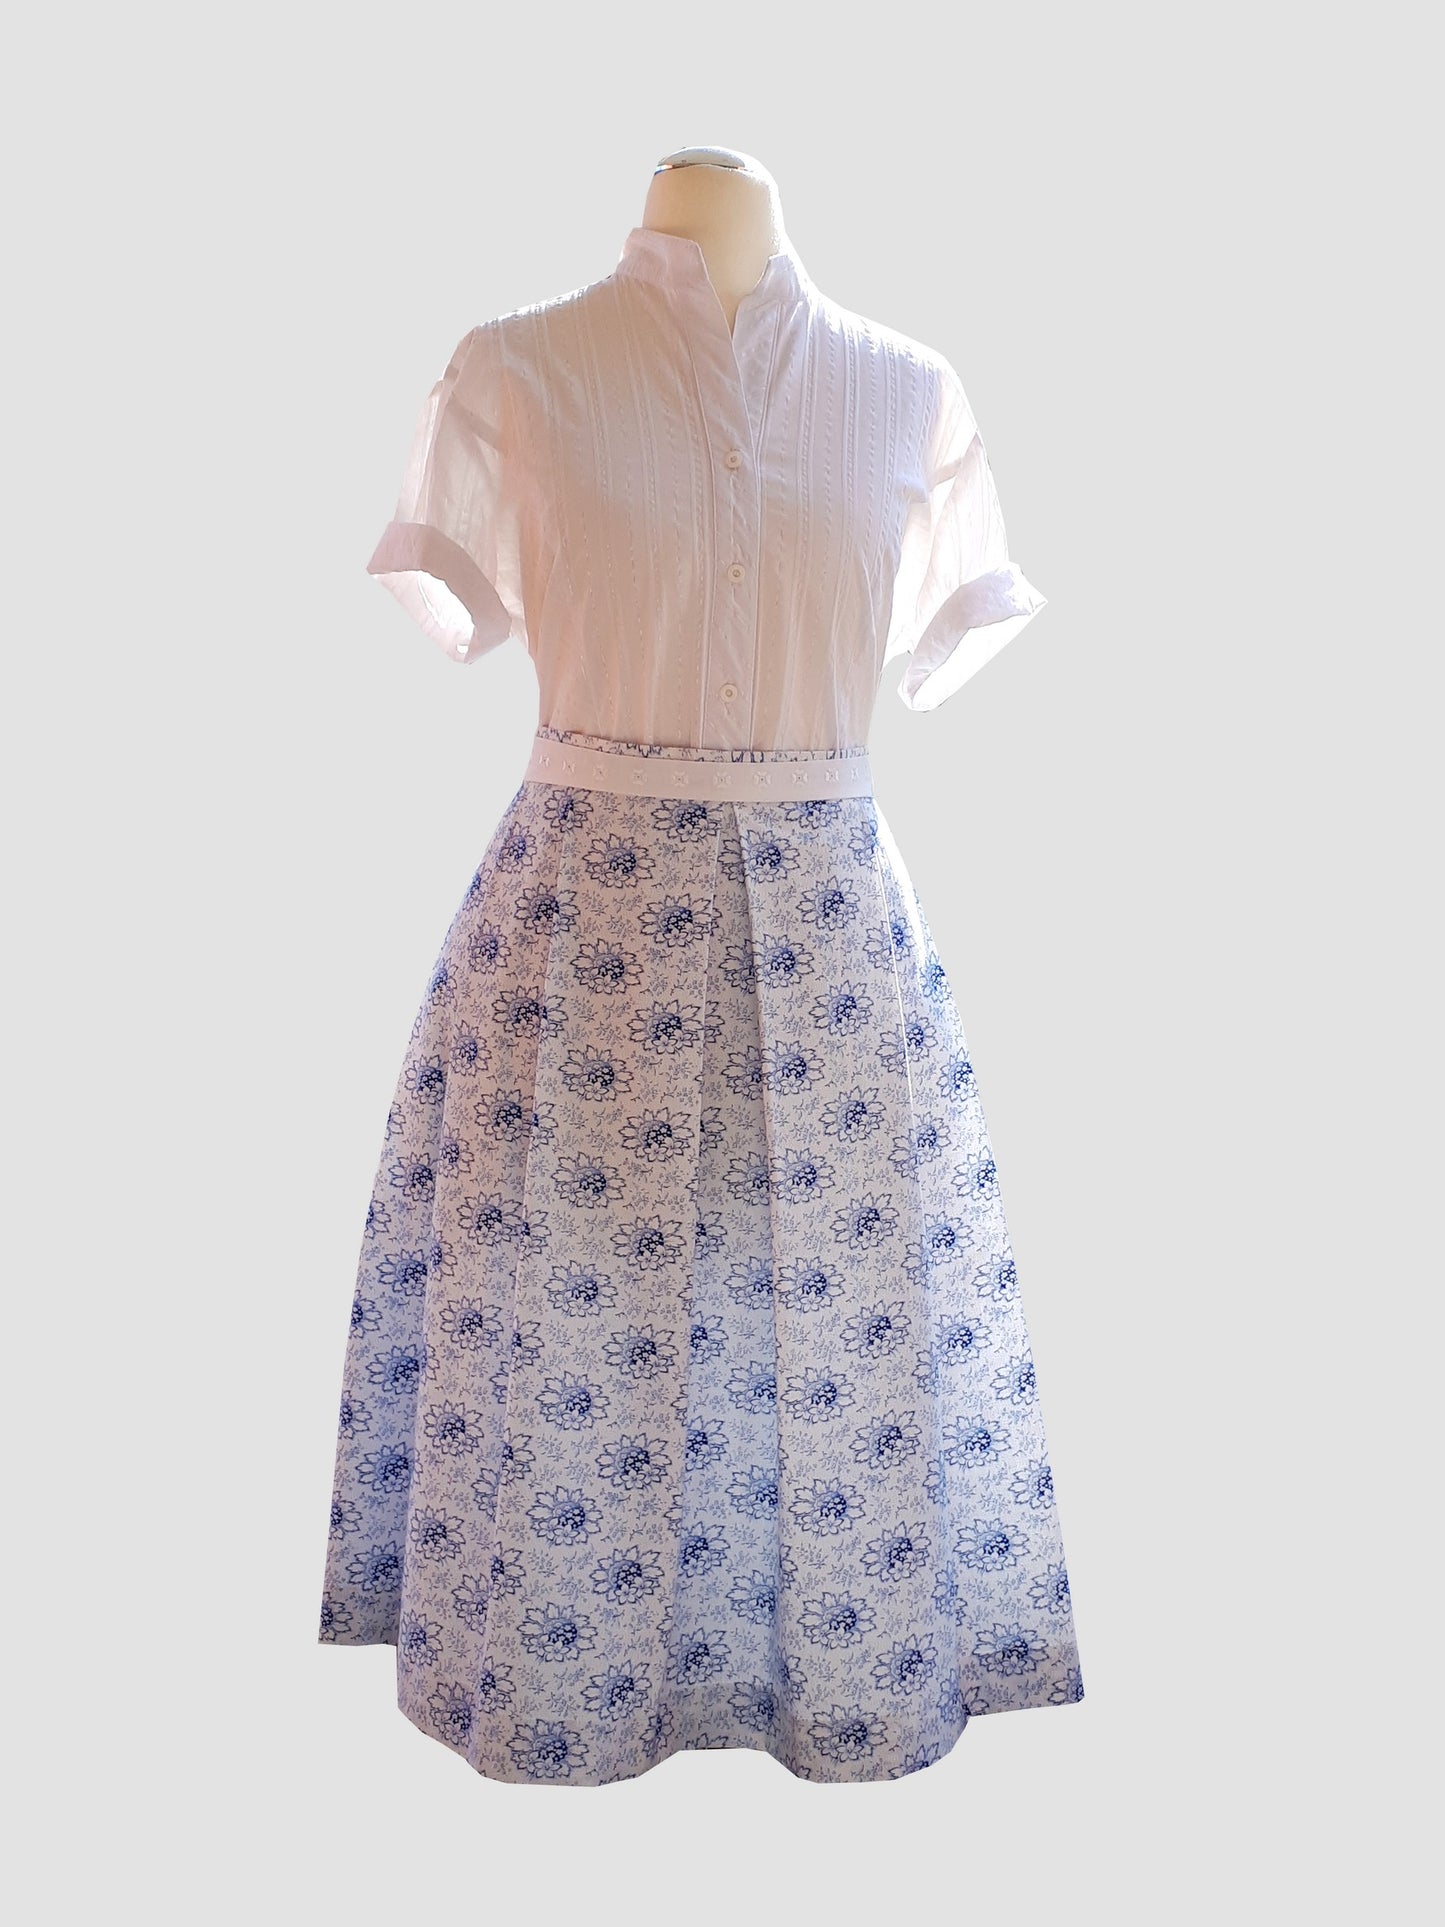 Women's traditional skirt "Charlotte" white-blue - size of your choice